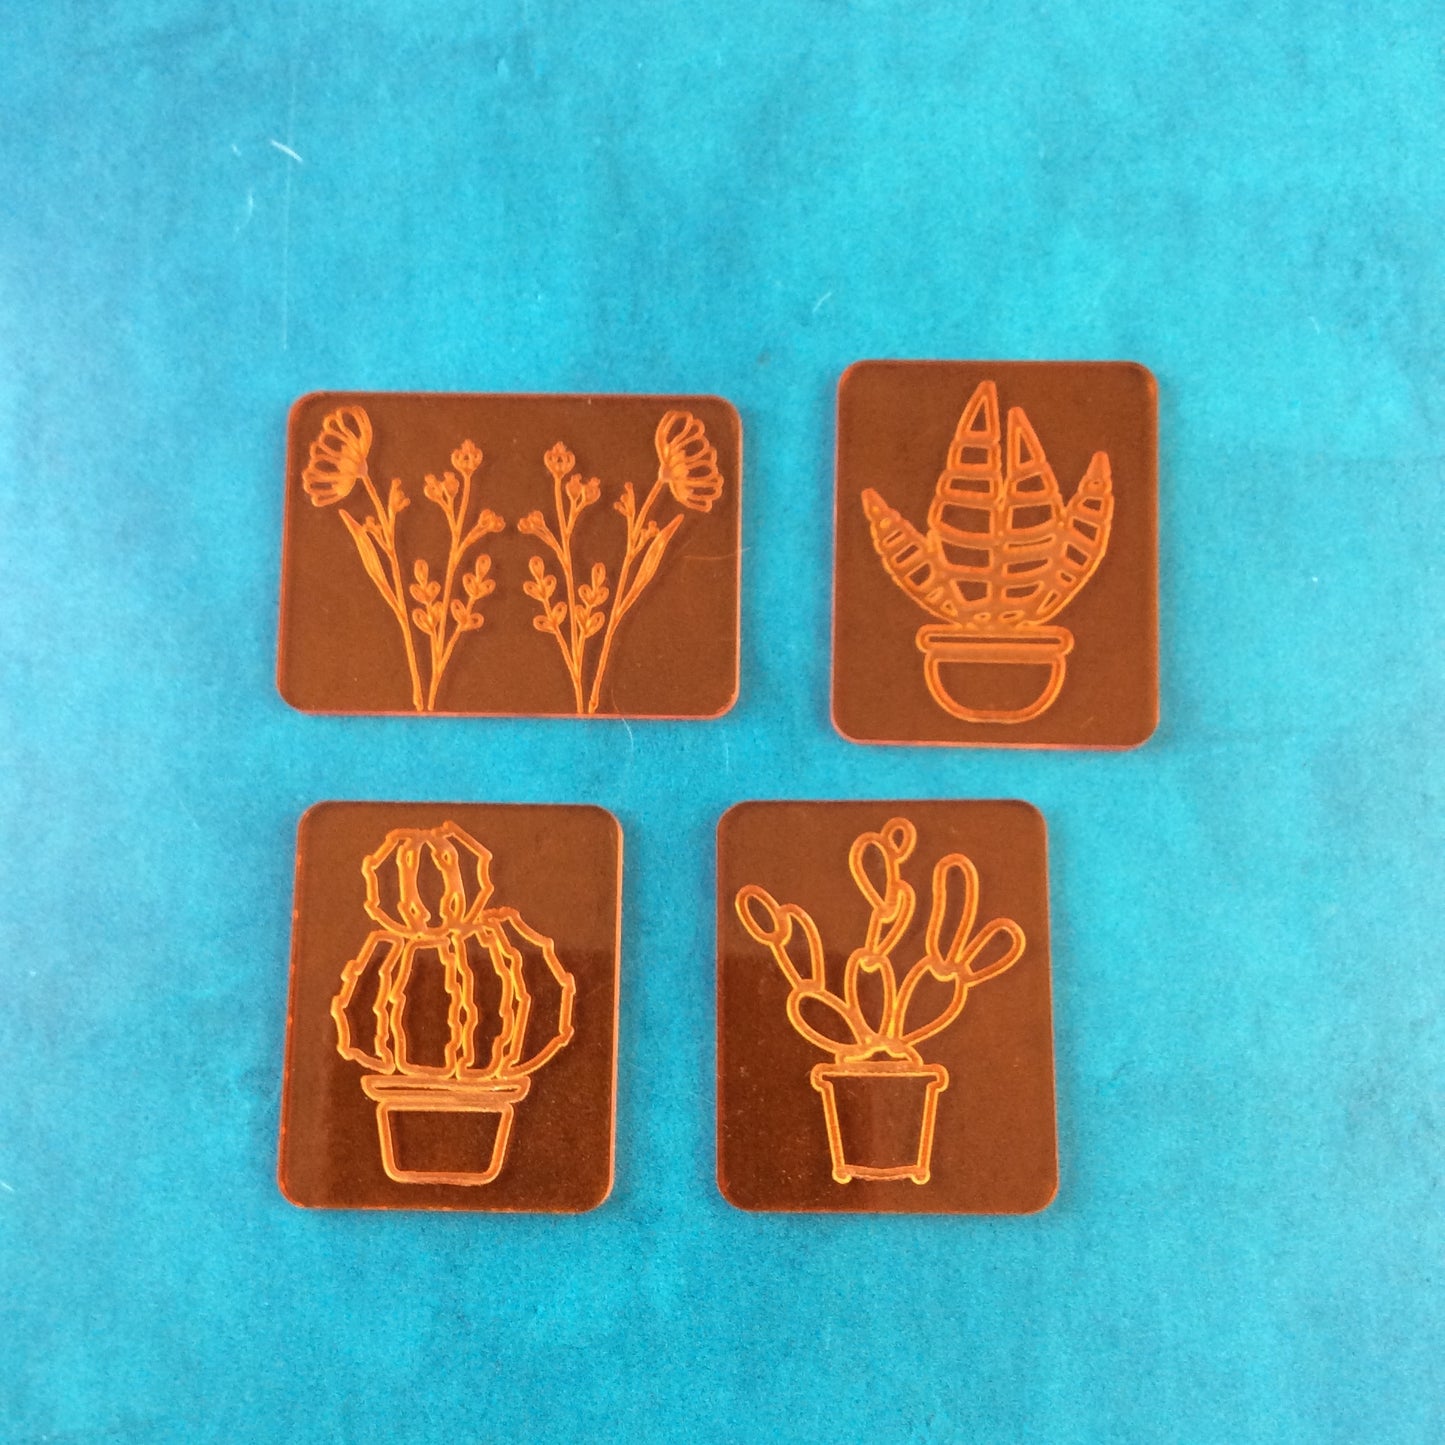 Deco Disc Desert Vibes Tiles Stamp and Texture Pattern Designs for polymer clay